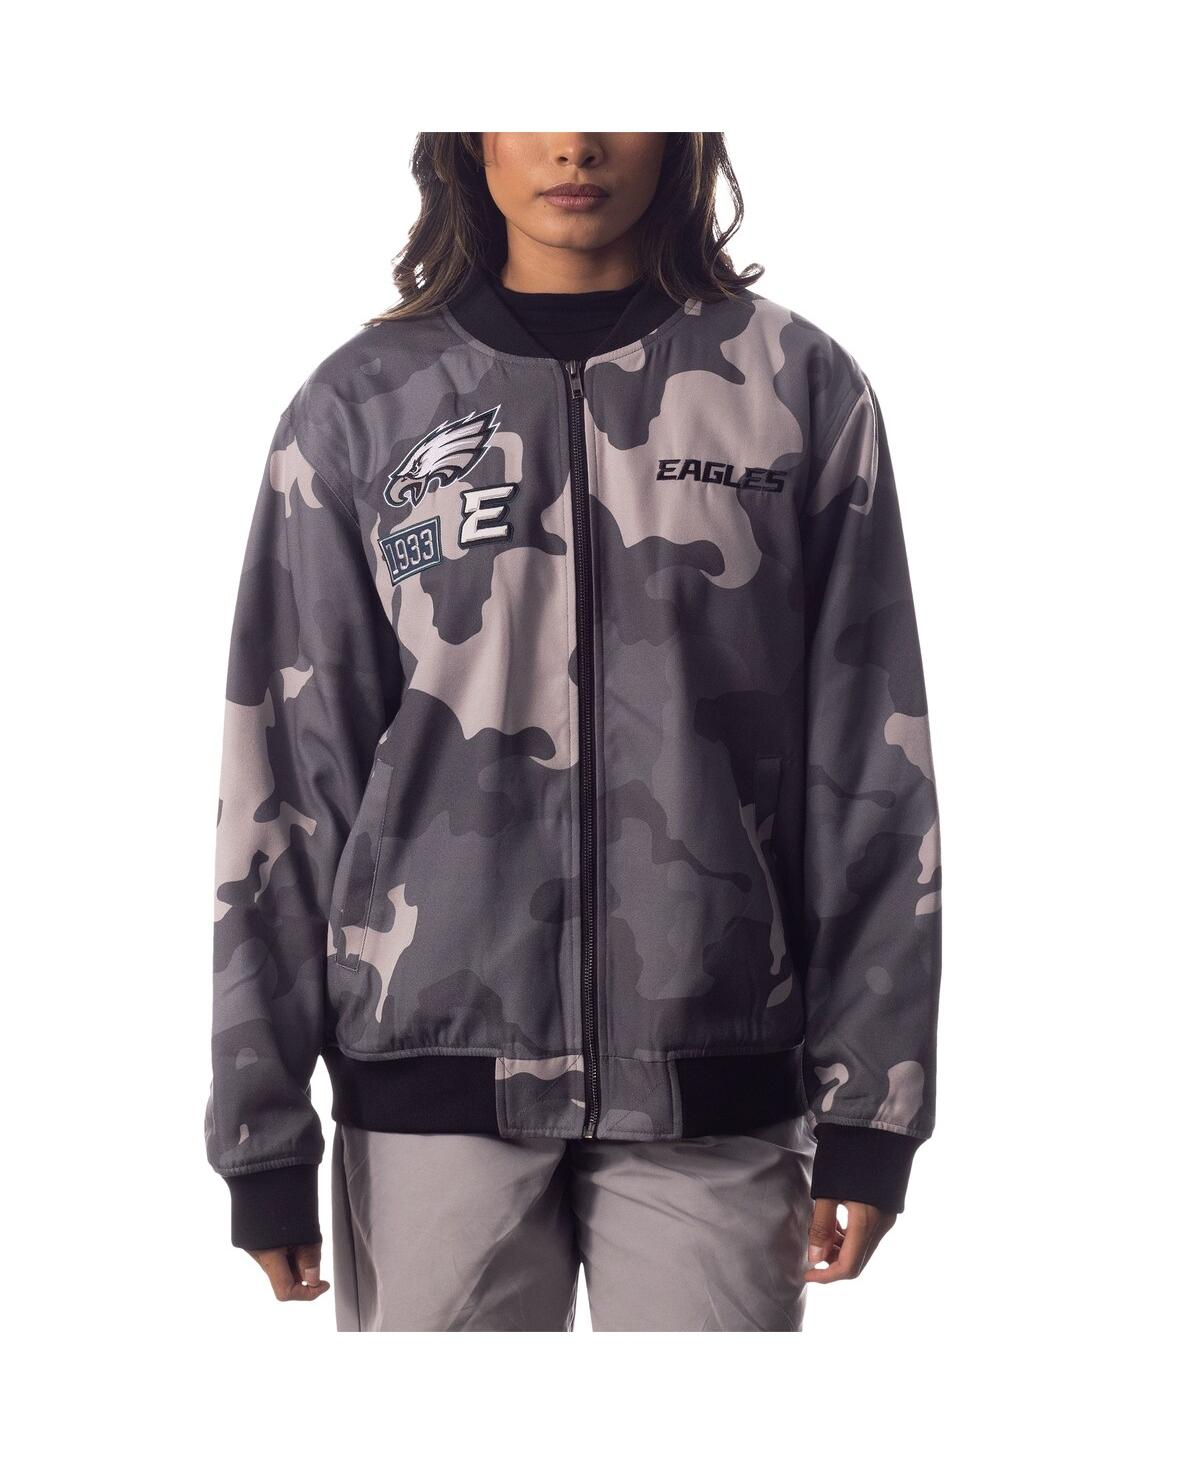 Shop The Wild Collective Men's And Women's  Gray Distressed Philadelphia Eagles Camo Bomber Jacket